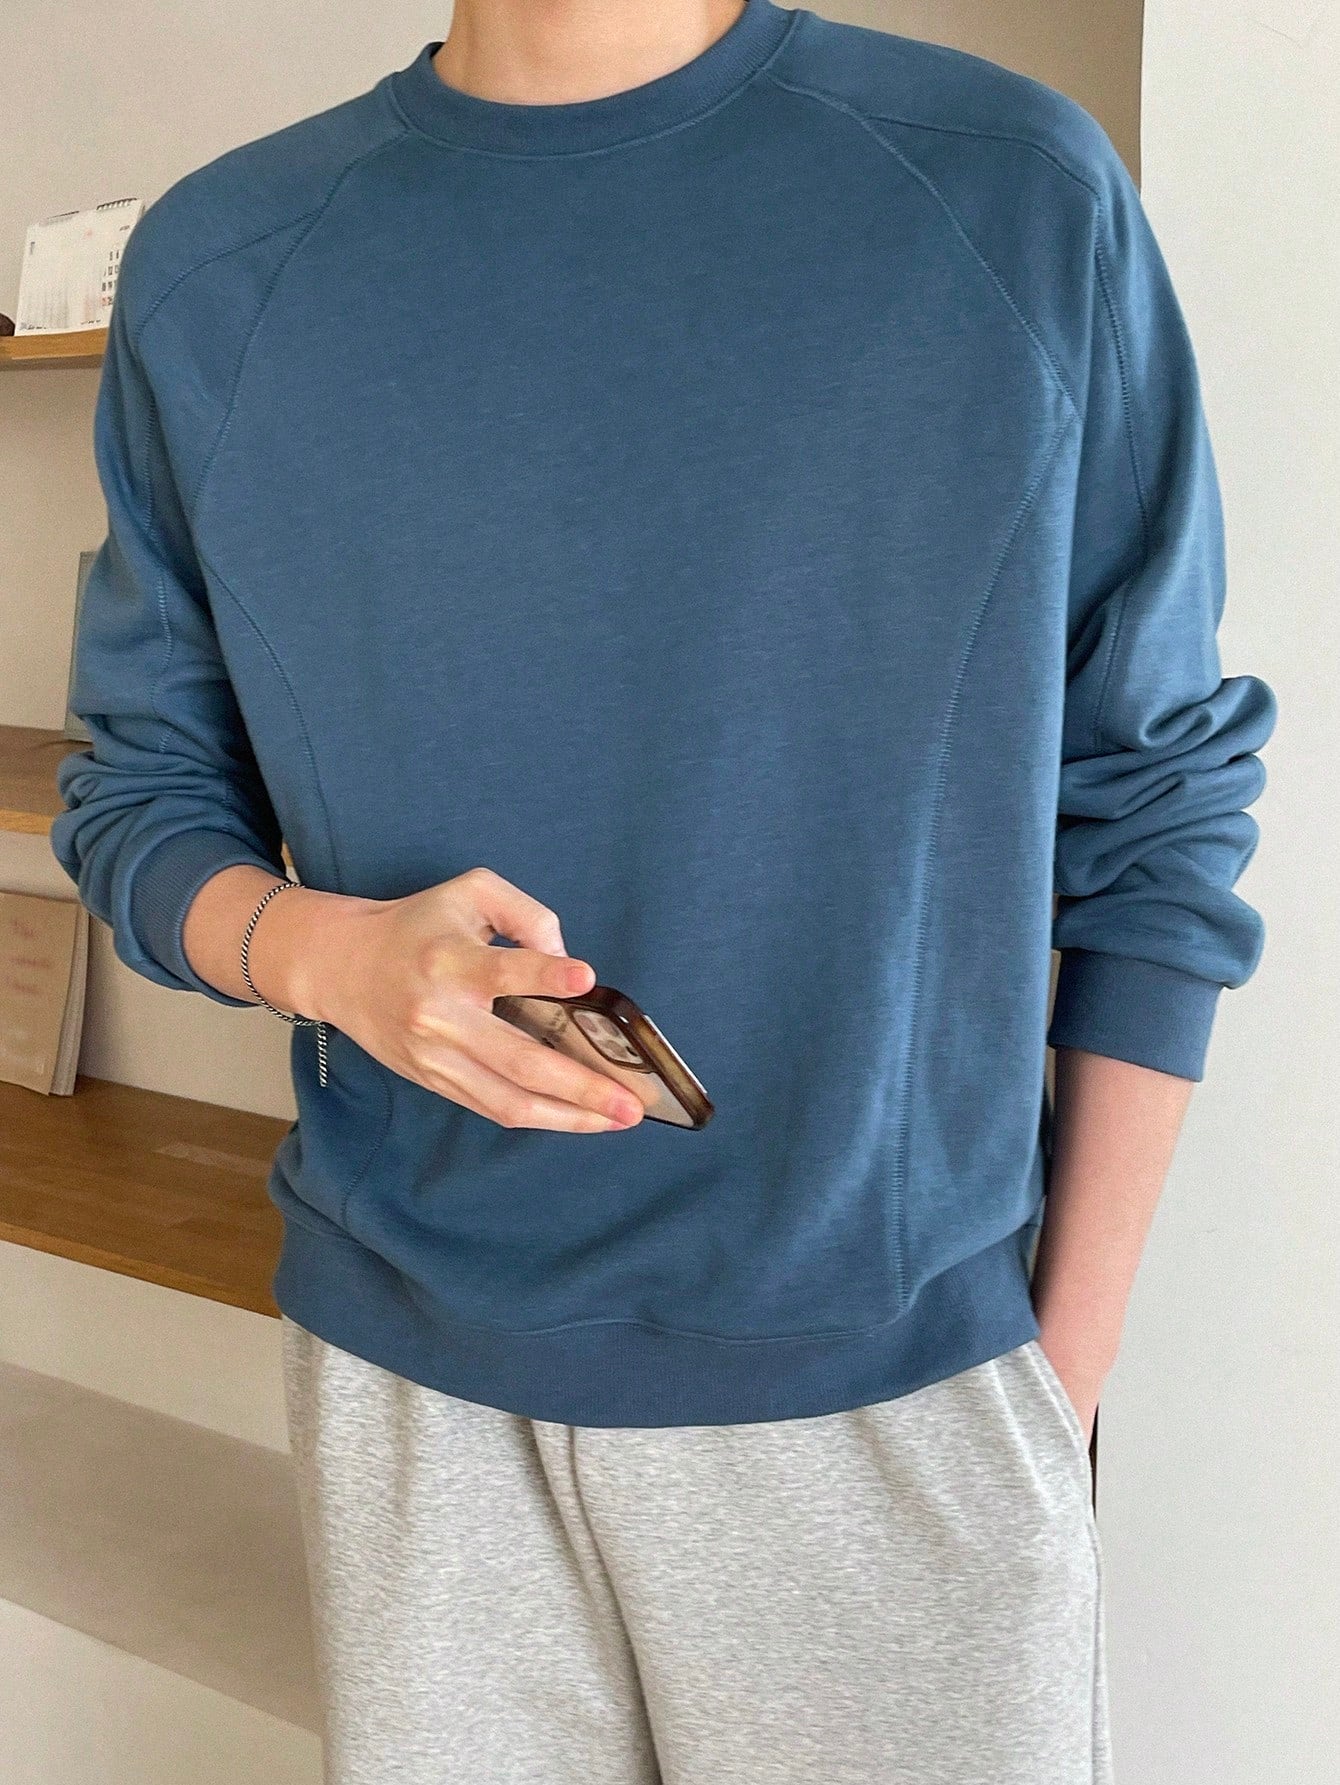 Men's Solid Color Round Neck Sweatshirt For Autumn And Winter